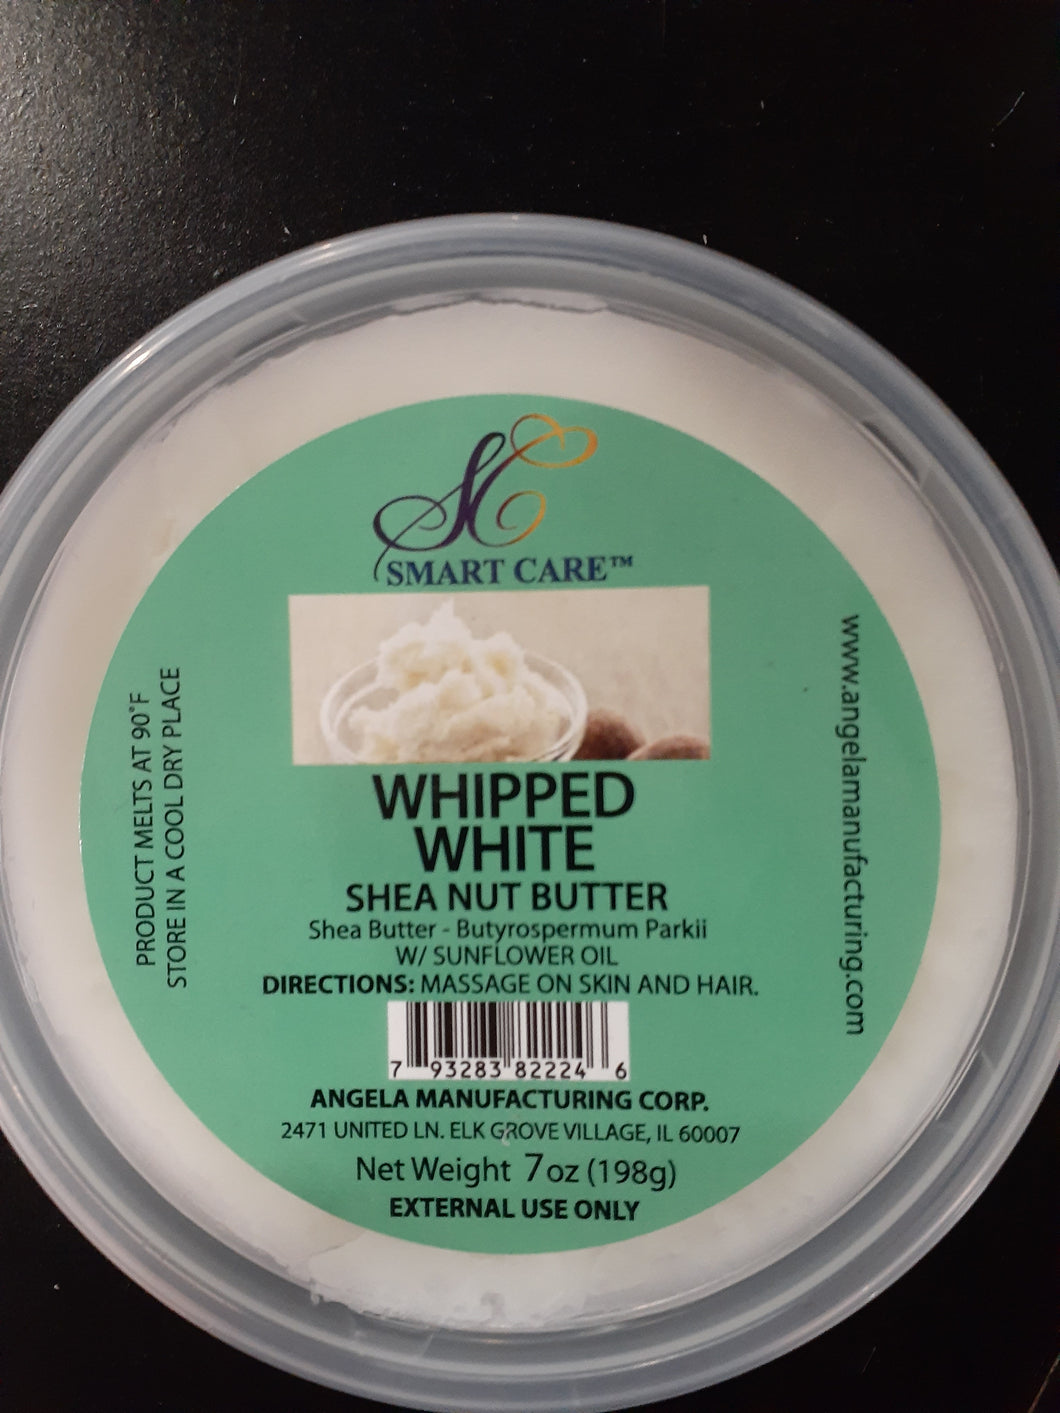 Smart care whipped white shea nut butter